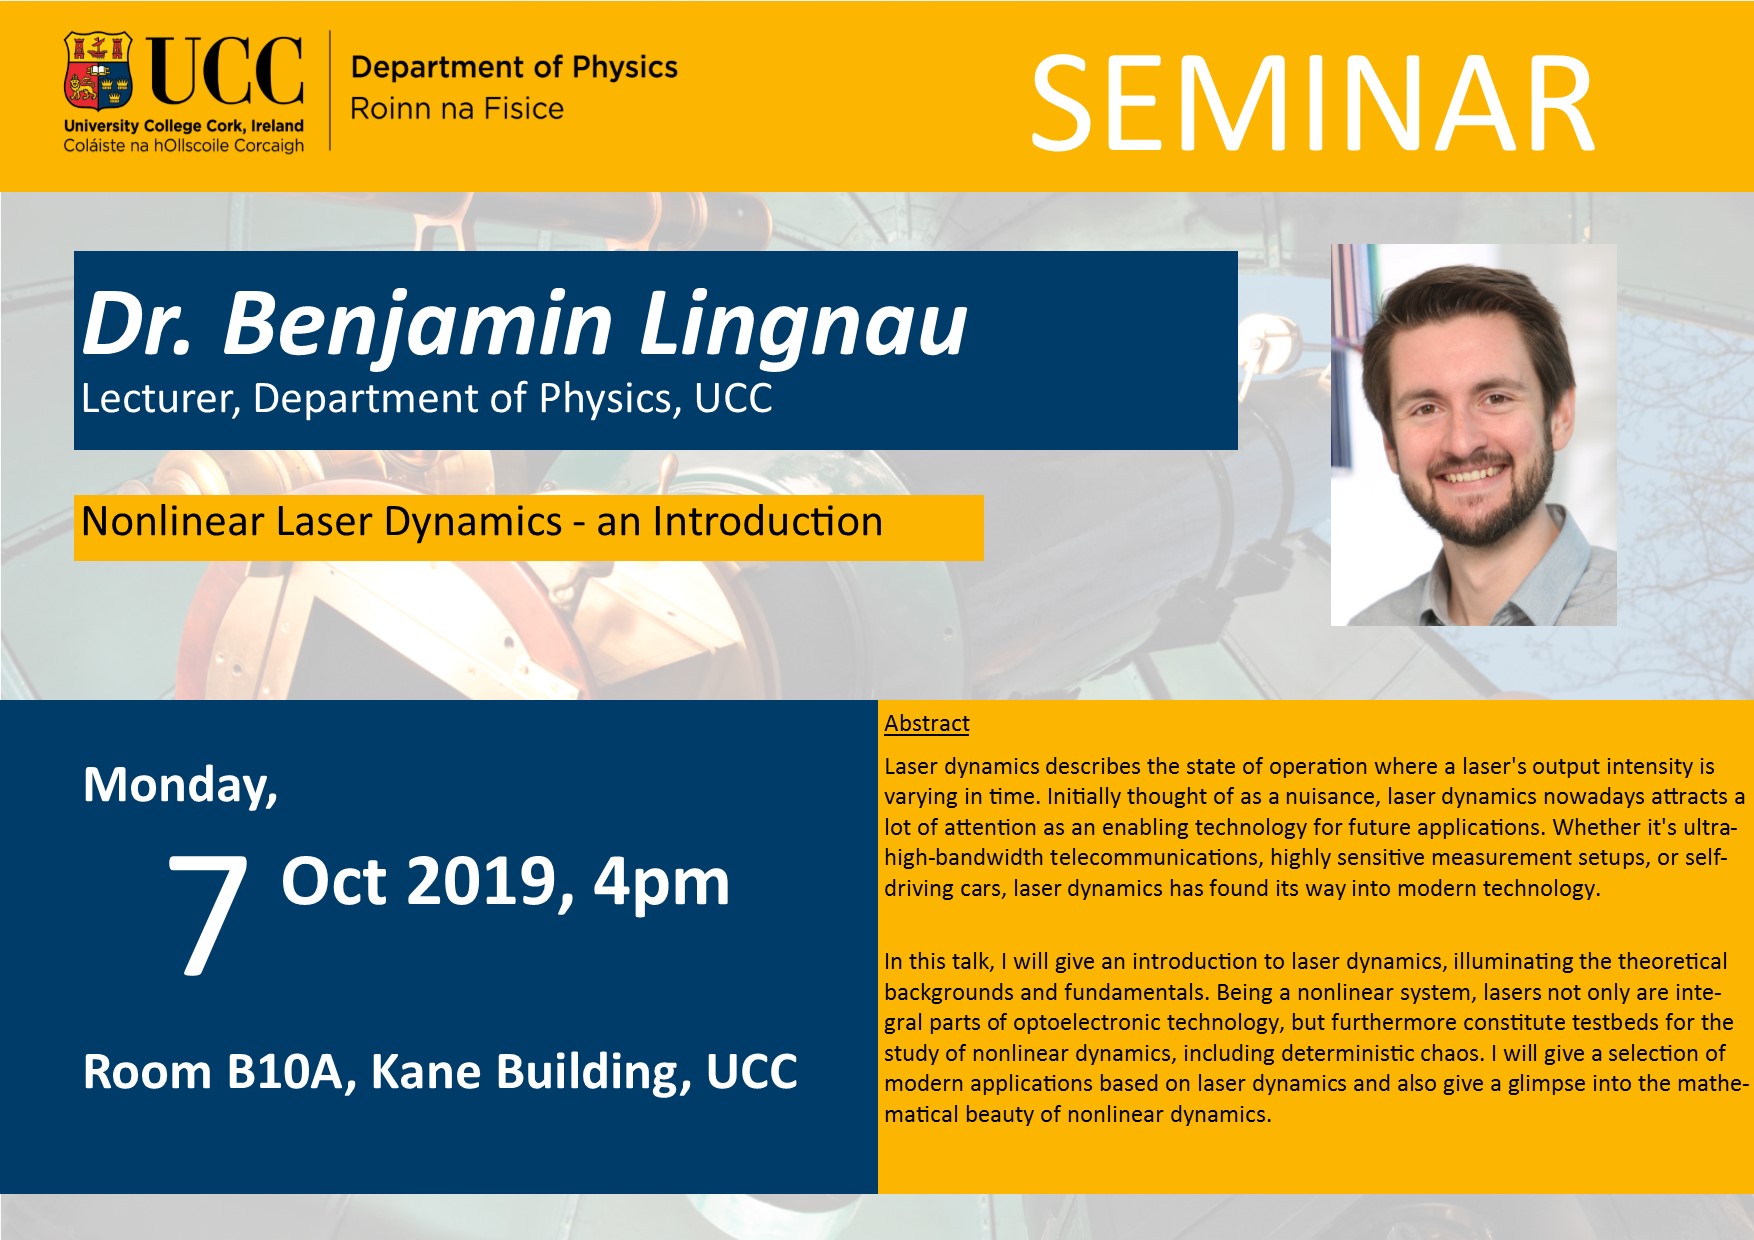 Image of Seminar poster for 7 Oct 2019